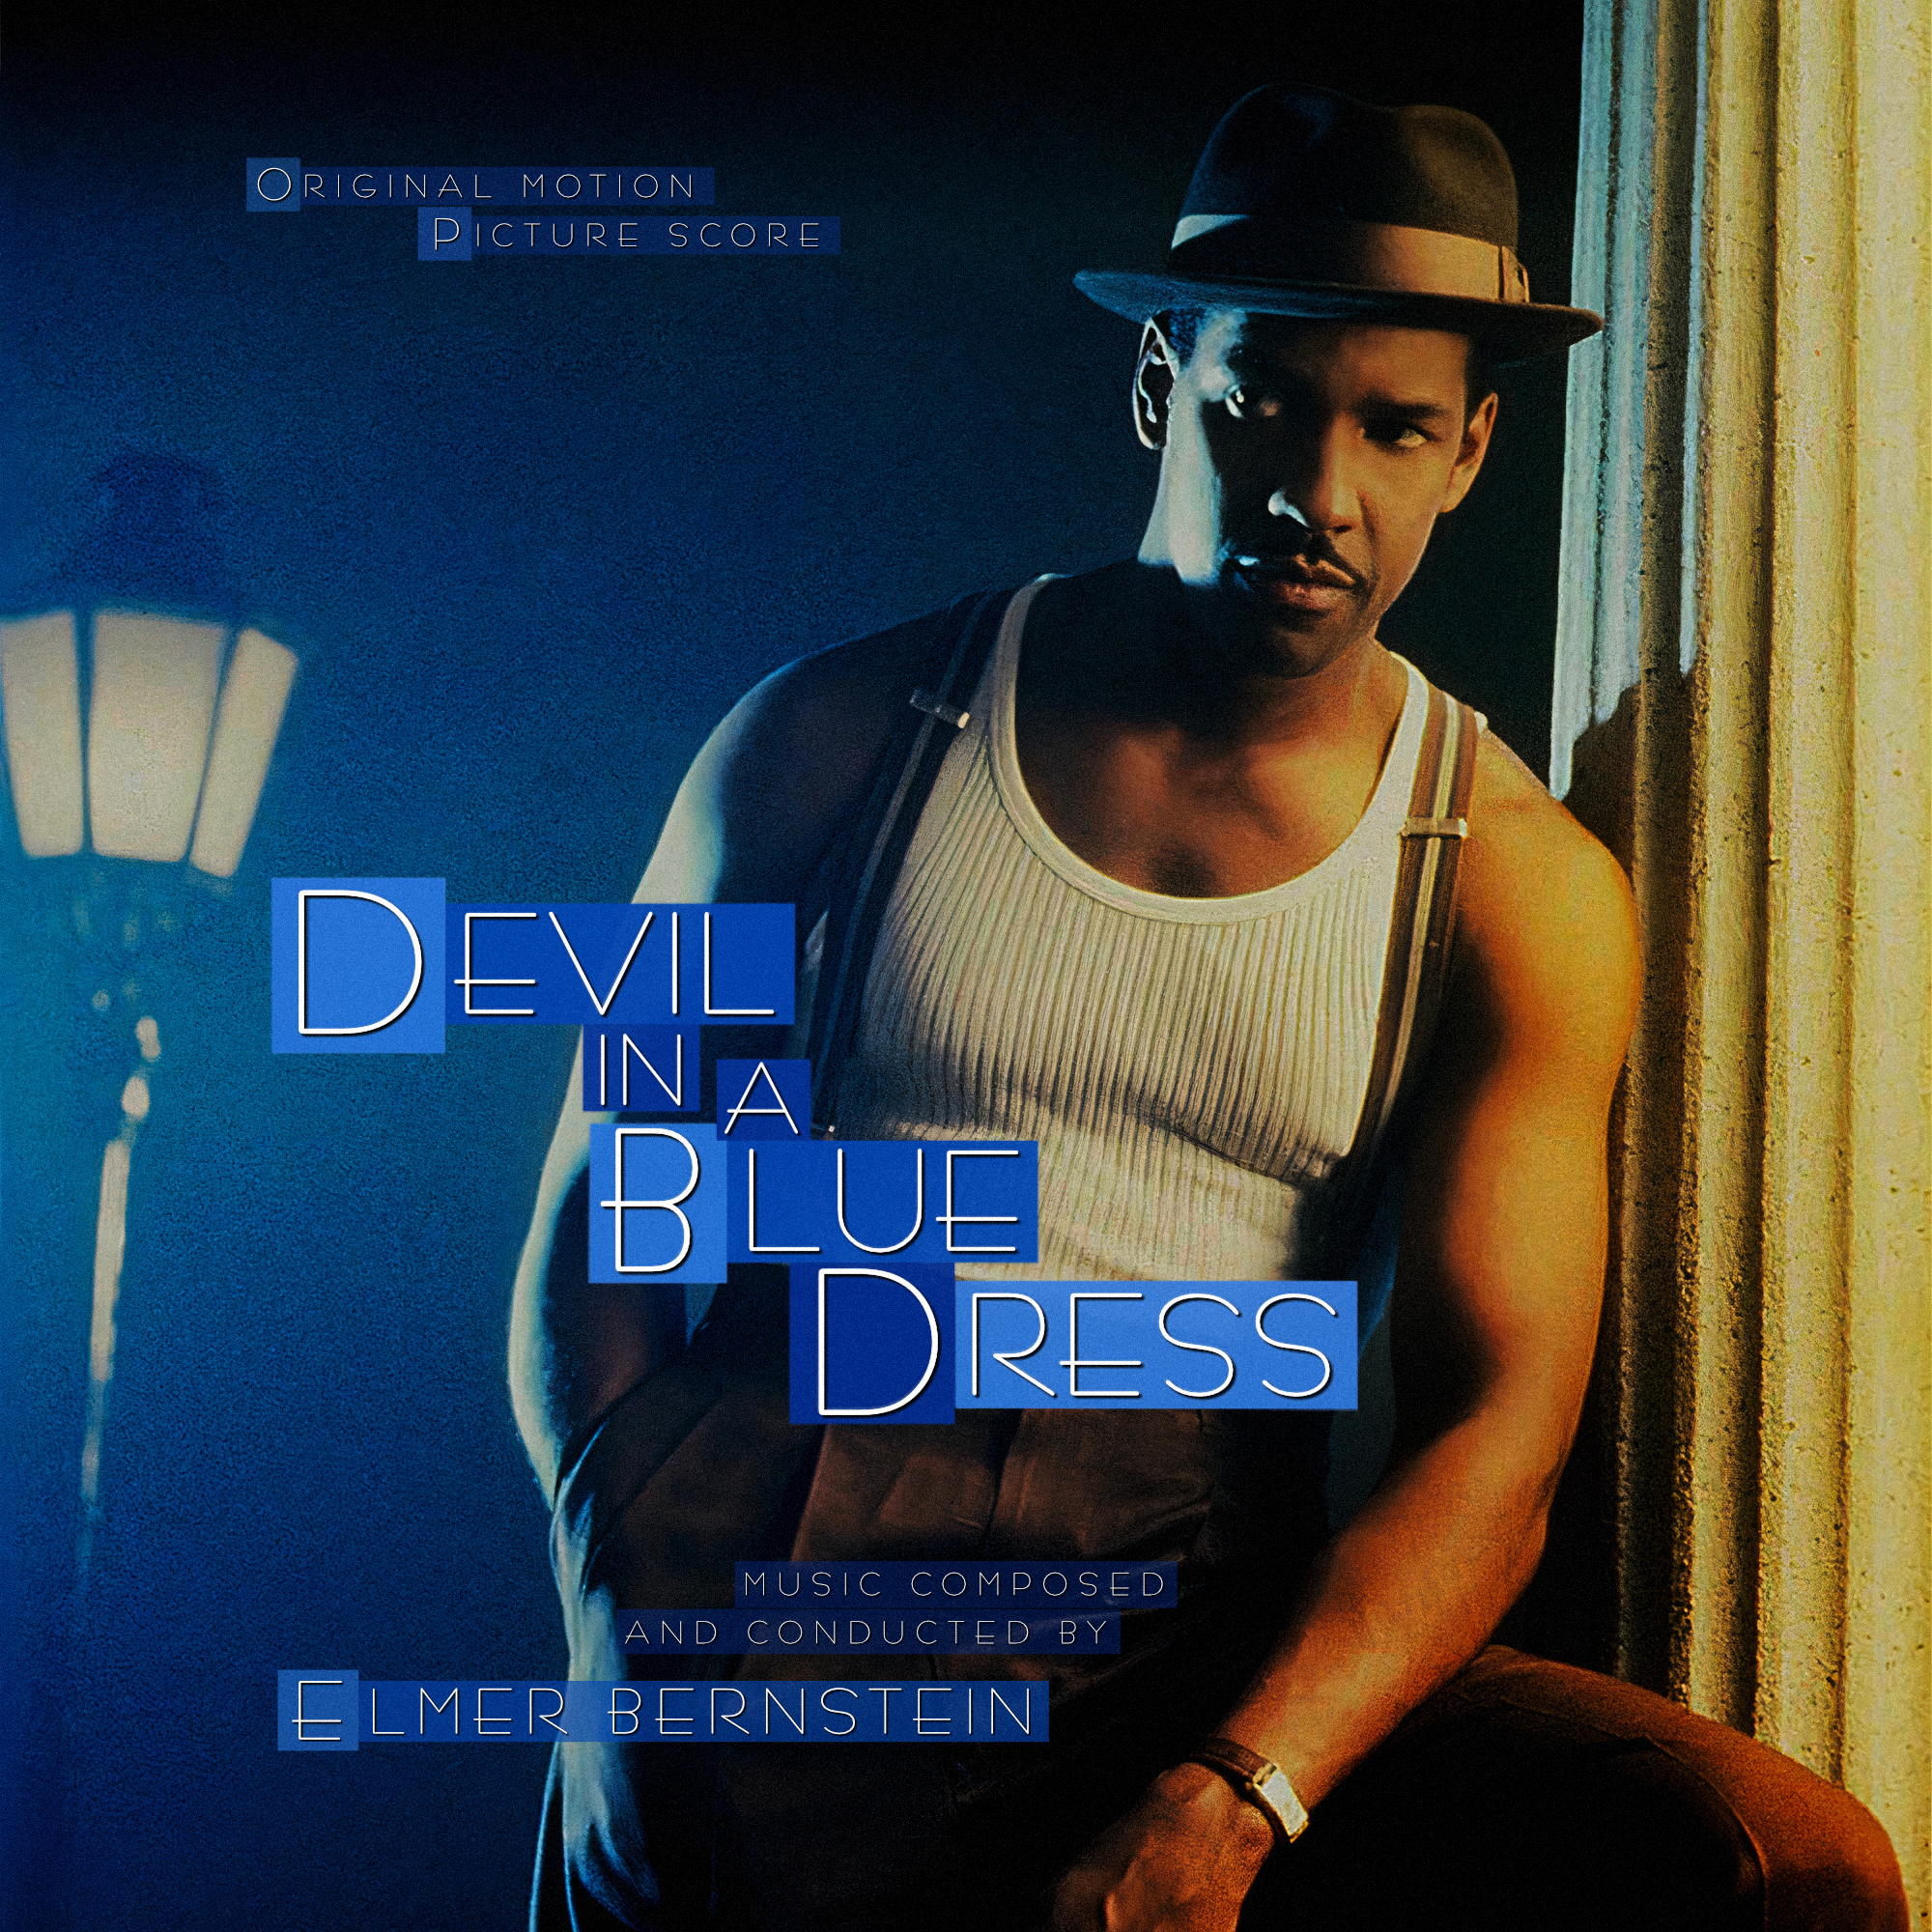 devil with a blue dress on song